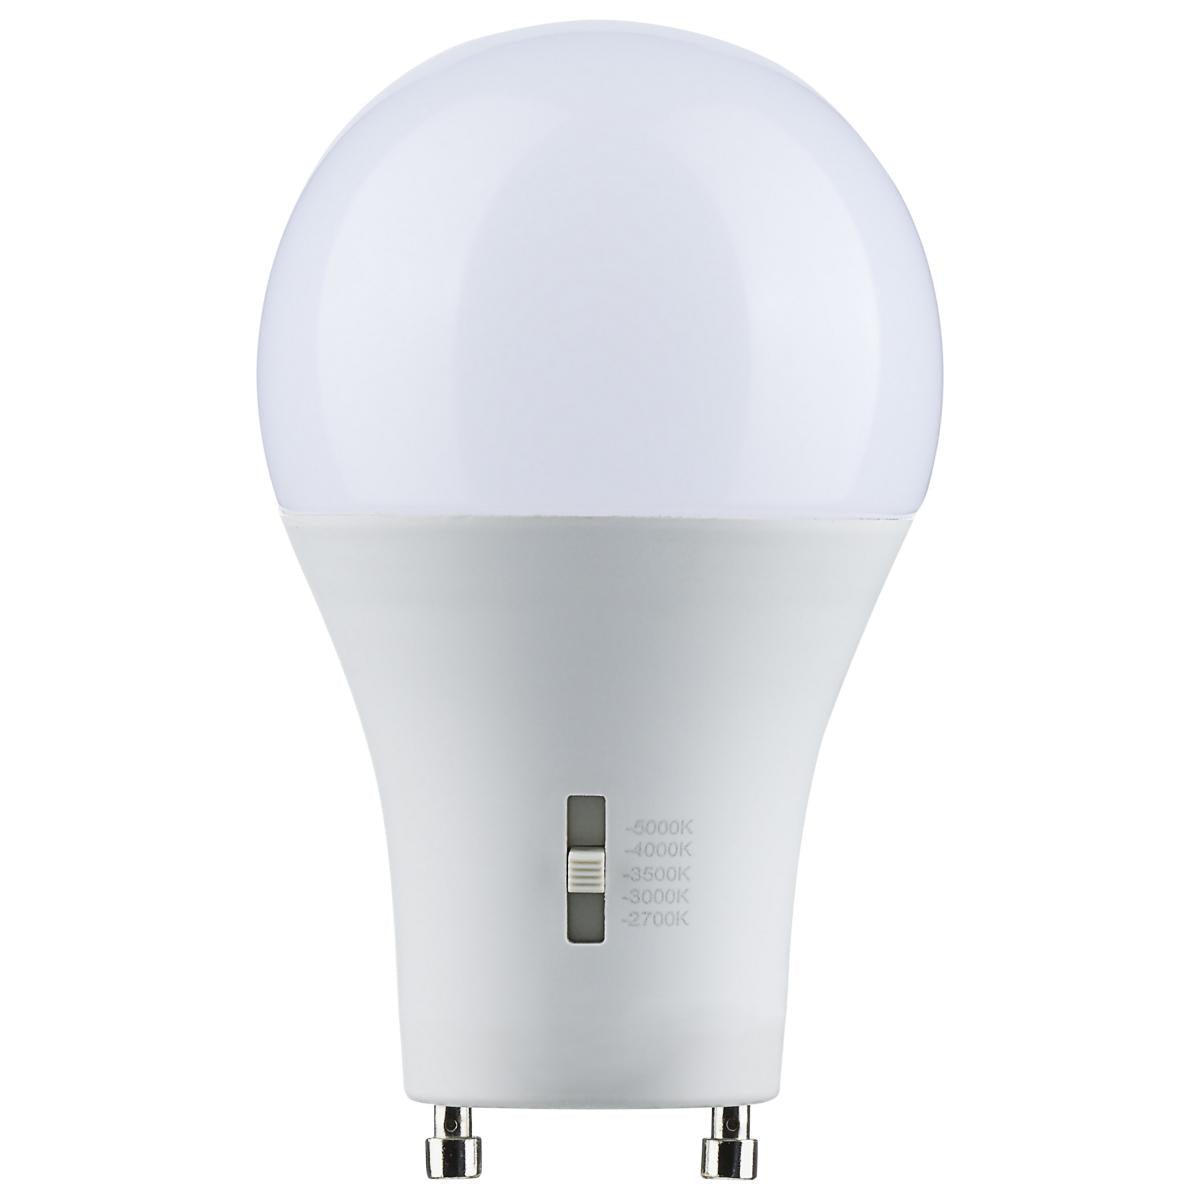 A19 LED Bulb, 60W Equivalent, 9 Watt, 800 Lumens, Selectable CCT 2700K to 5000K, GU24 Base, Frosted Finish - Bees Lighting